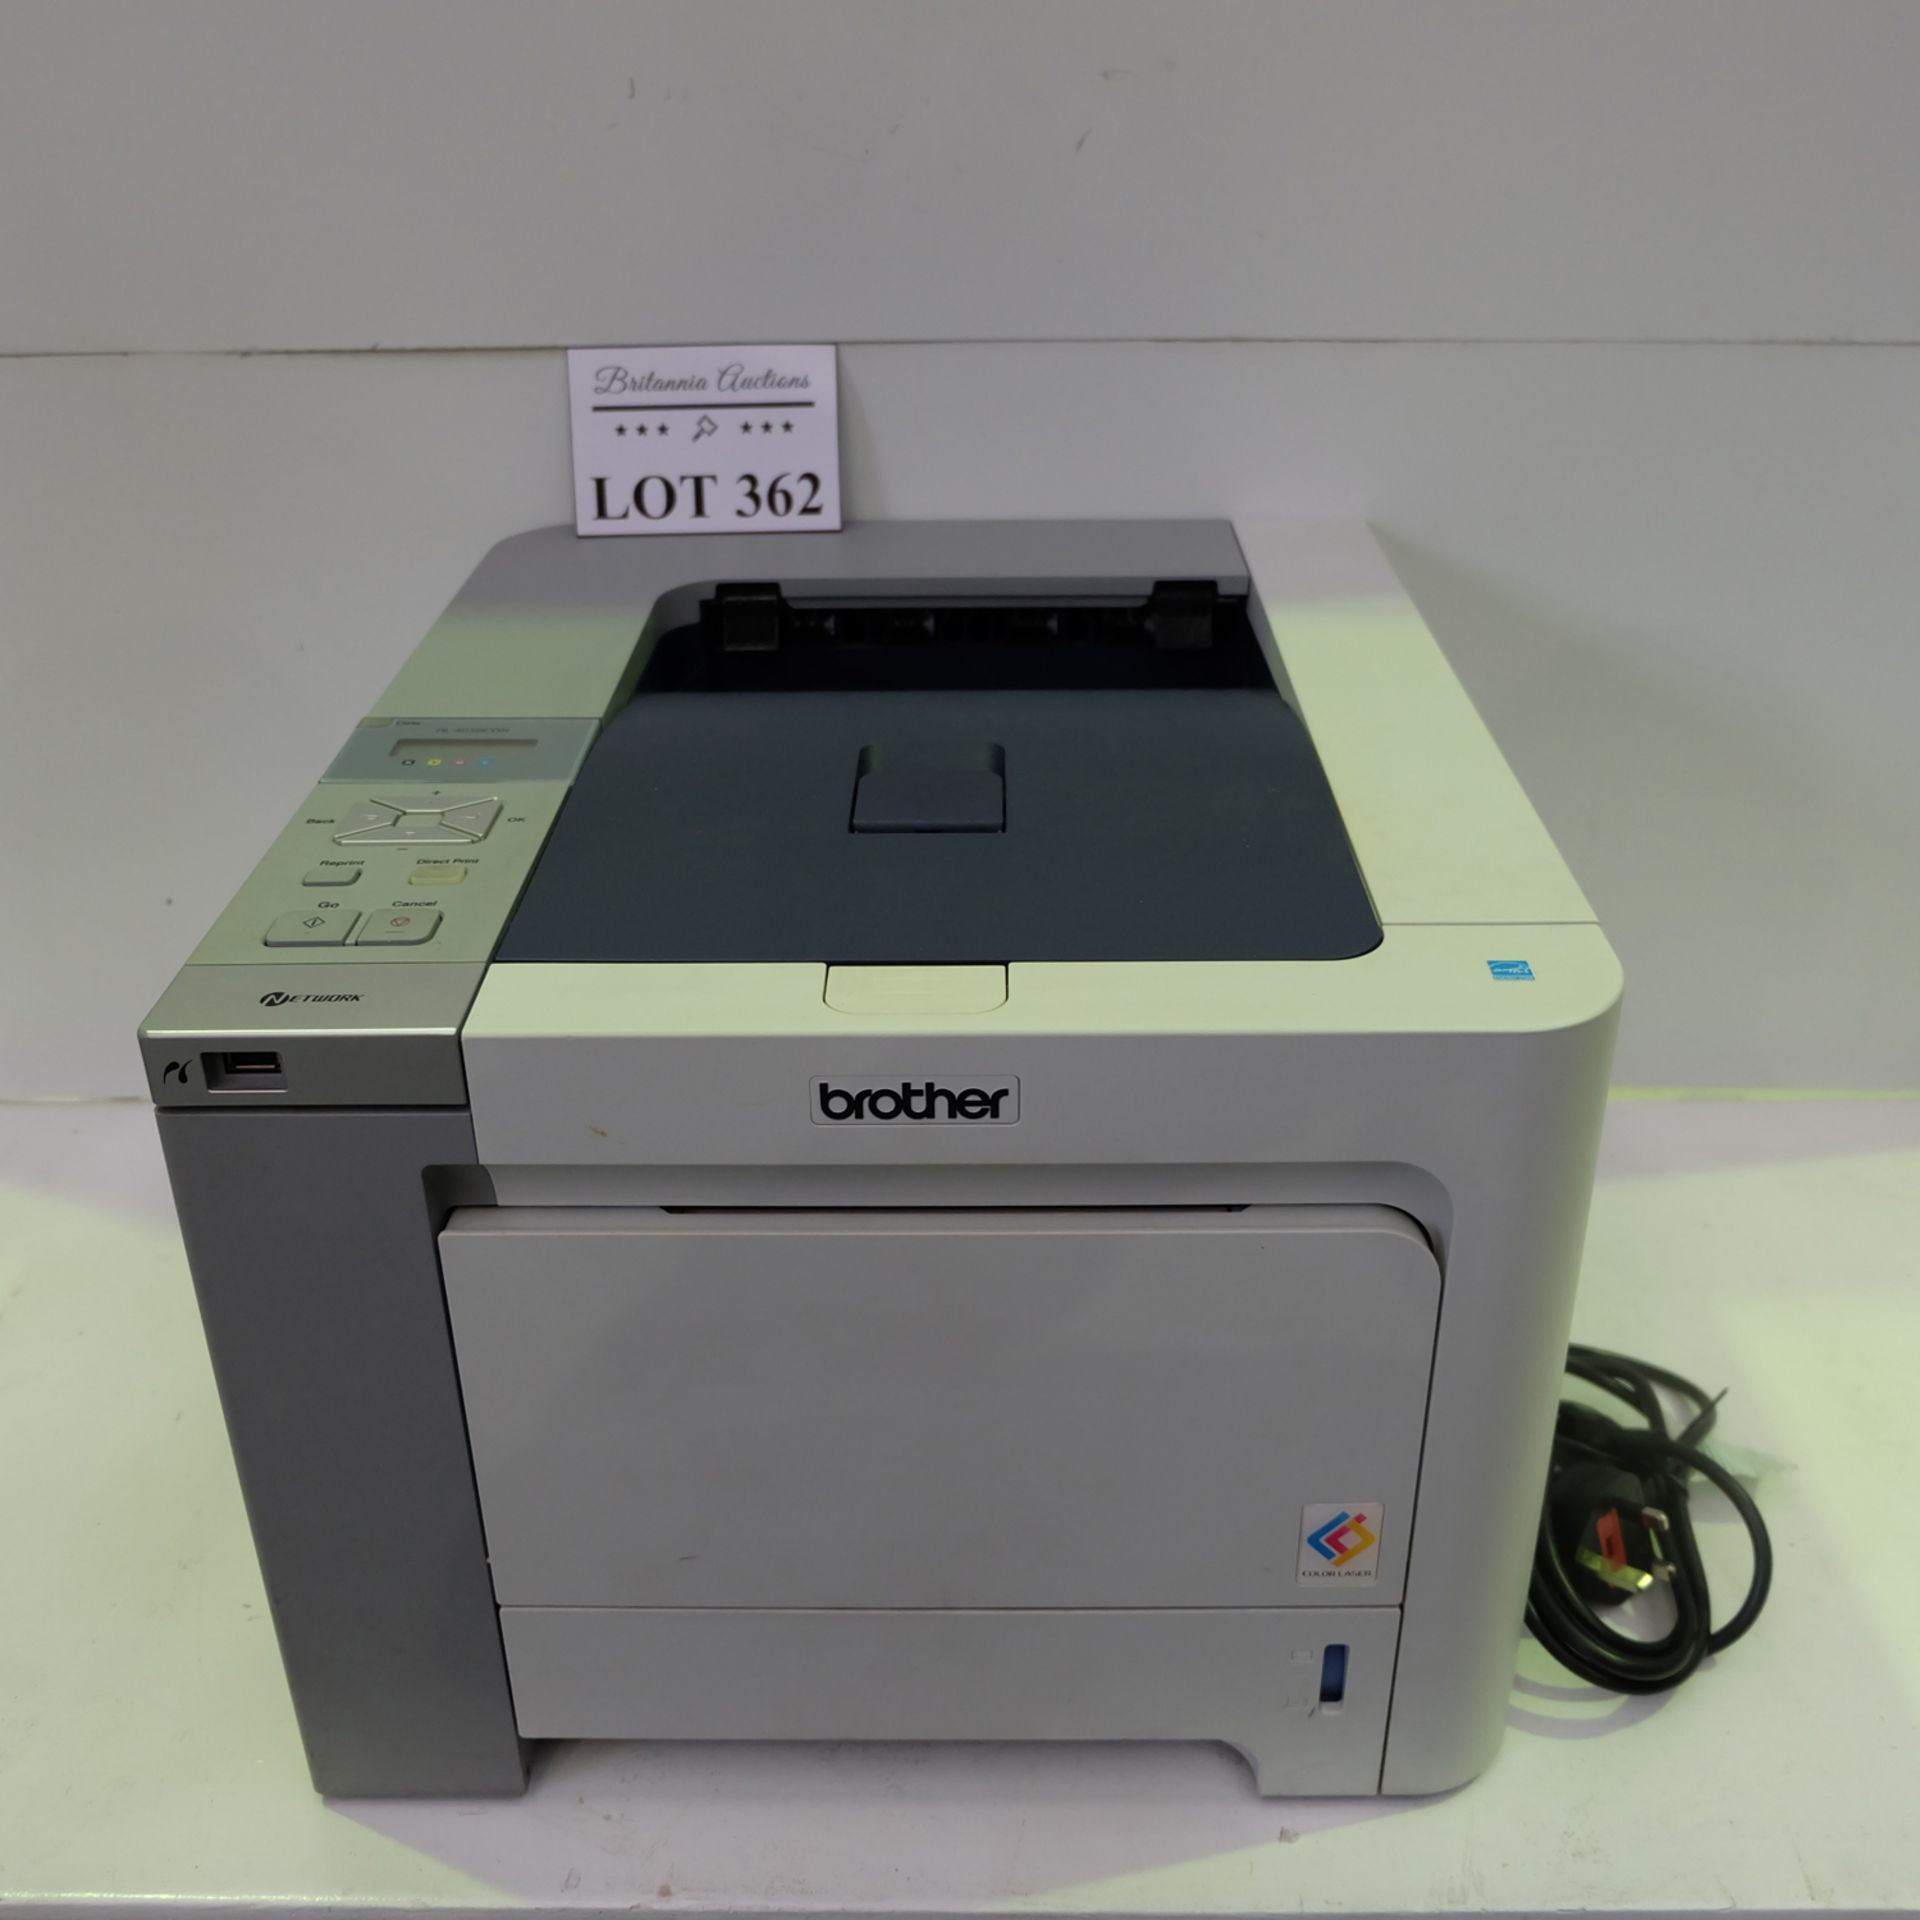 Brother Model HL-4050CDN Colour Laser Printer with 3 x Cartridges.